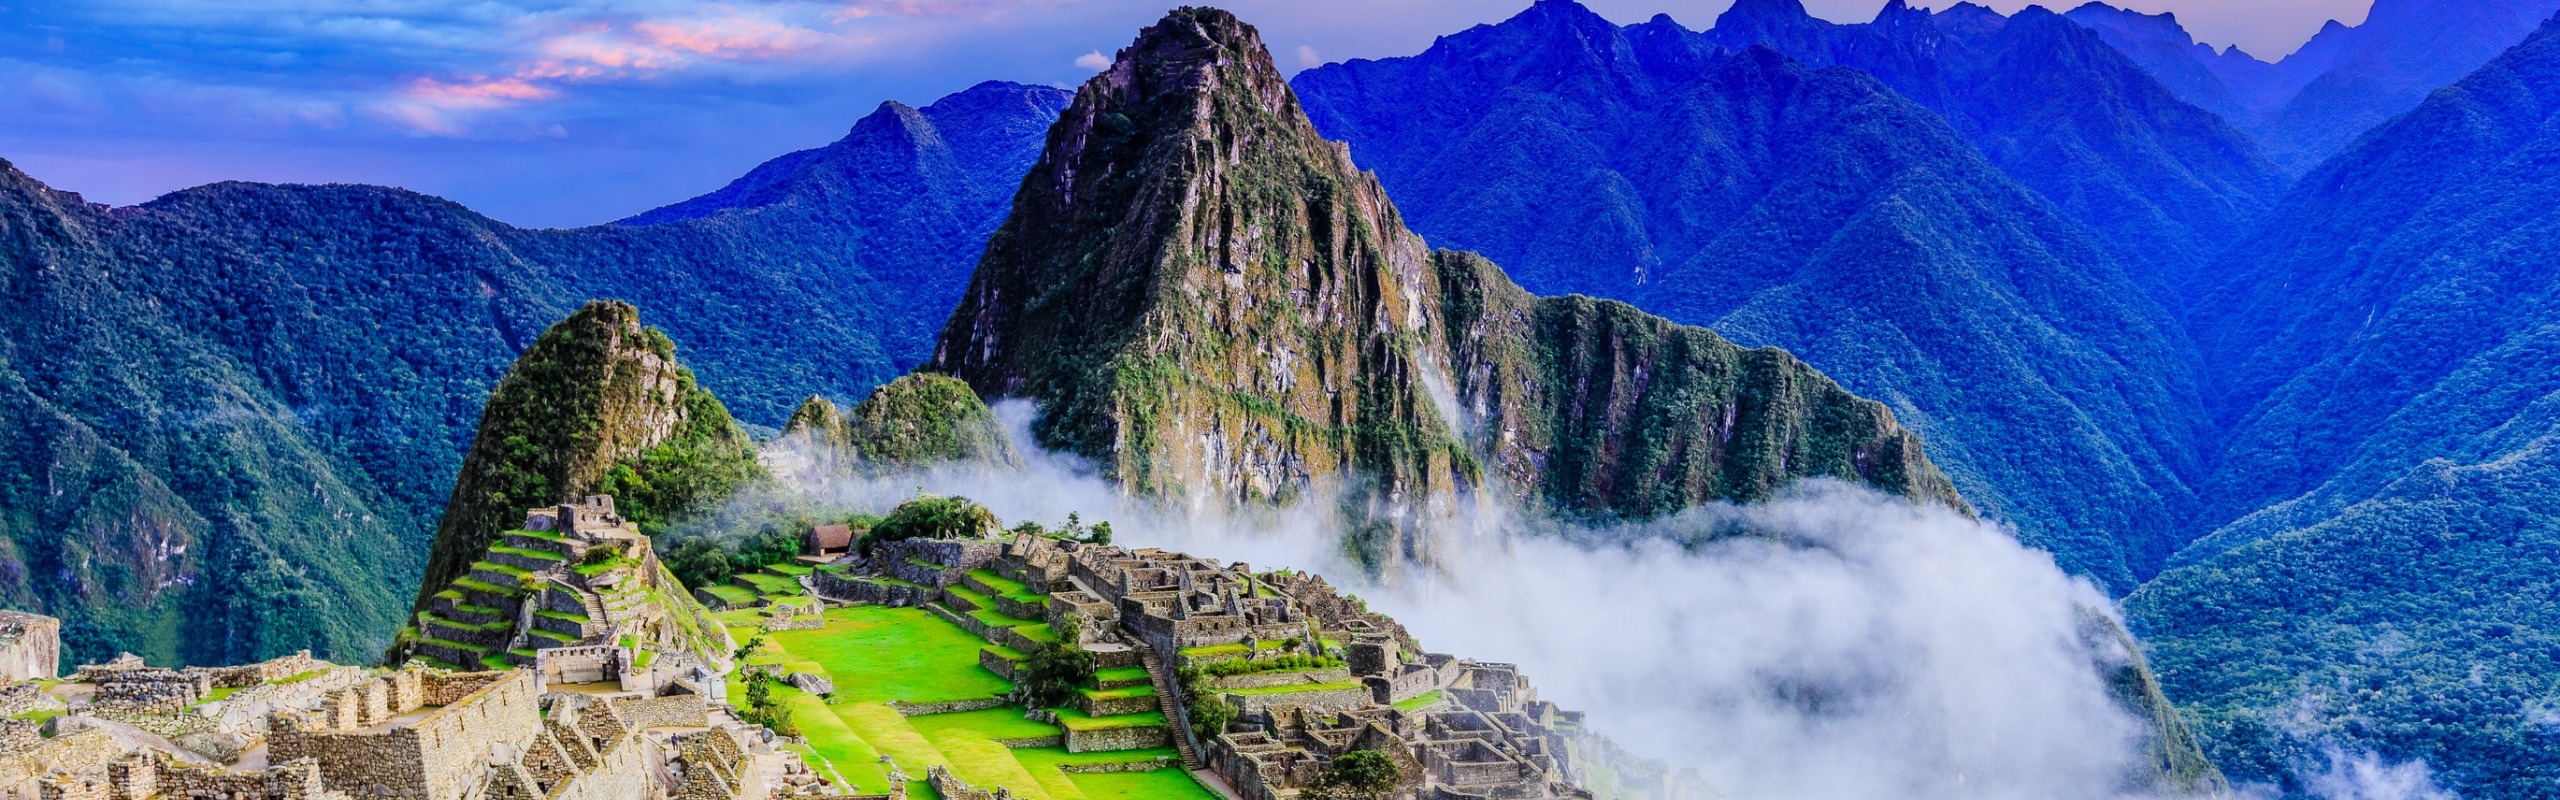 Peru Weather in January: Rainy? Best Places to Visit